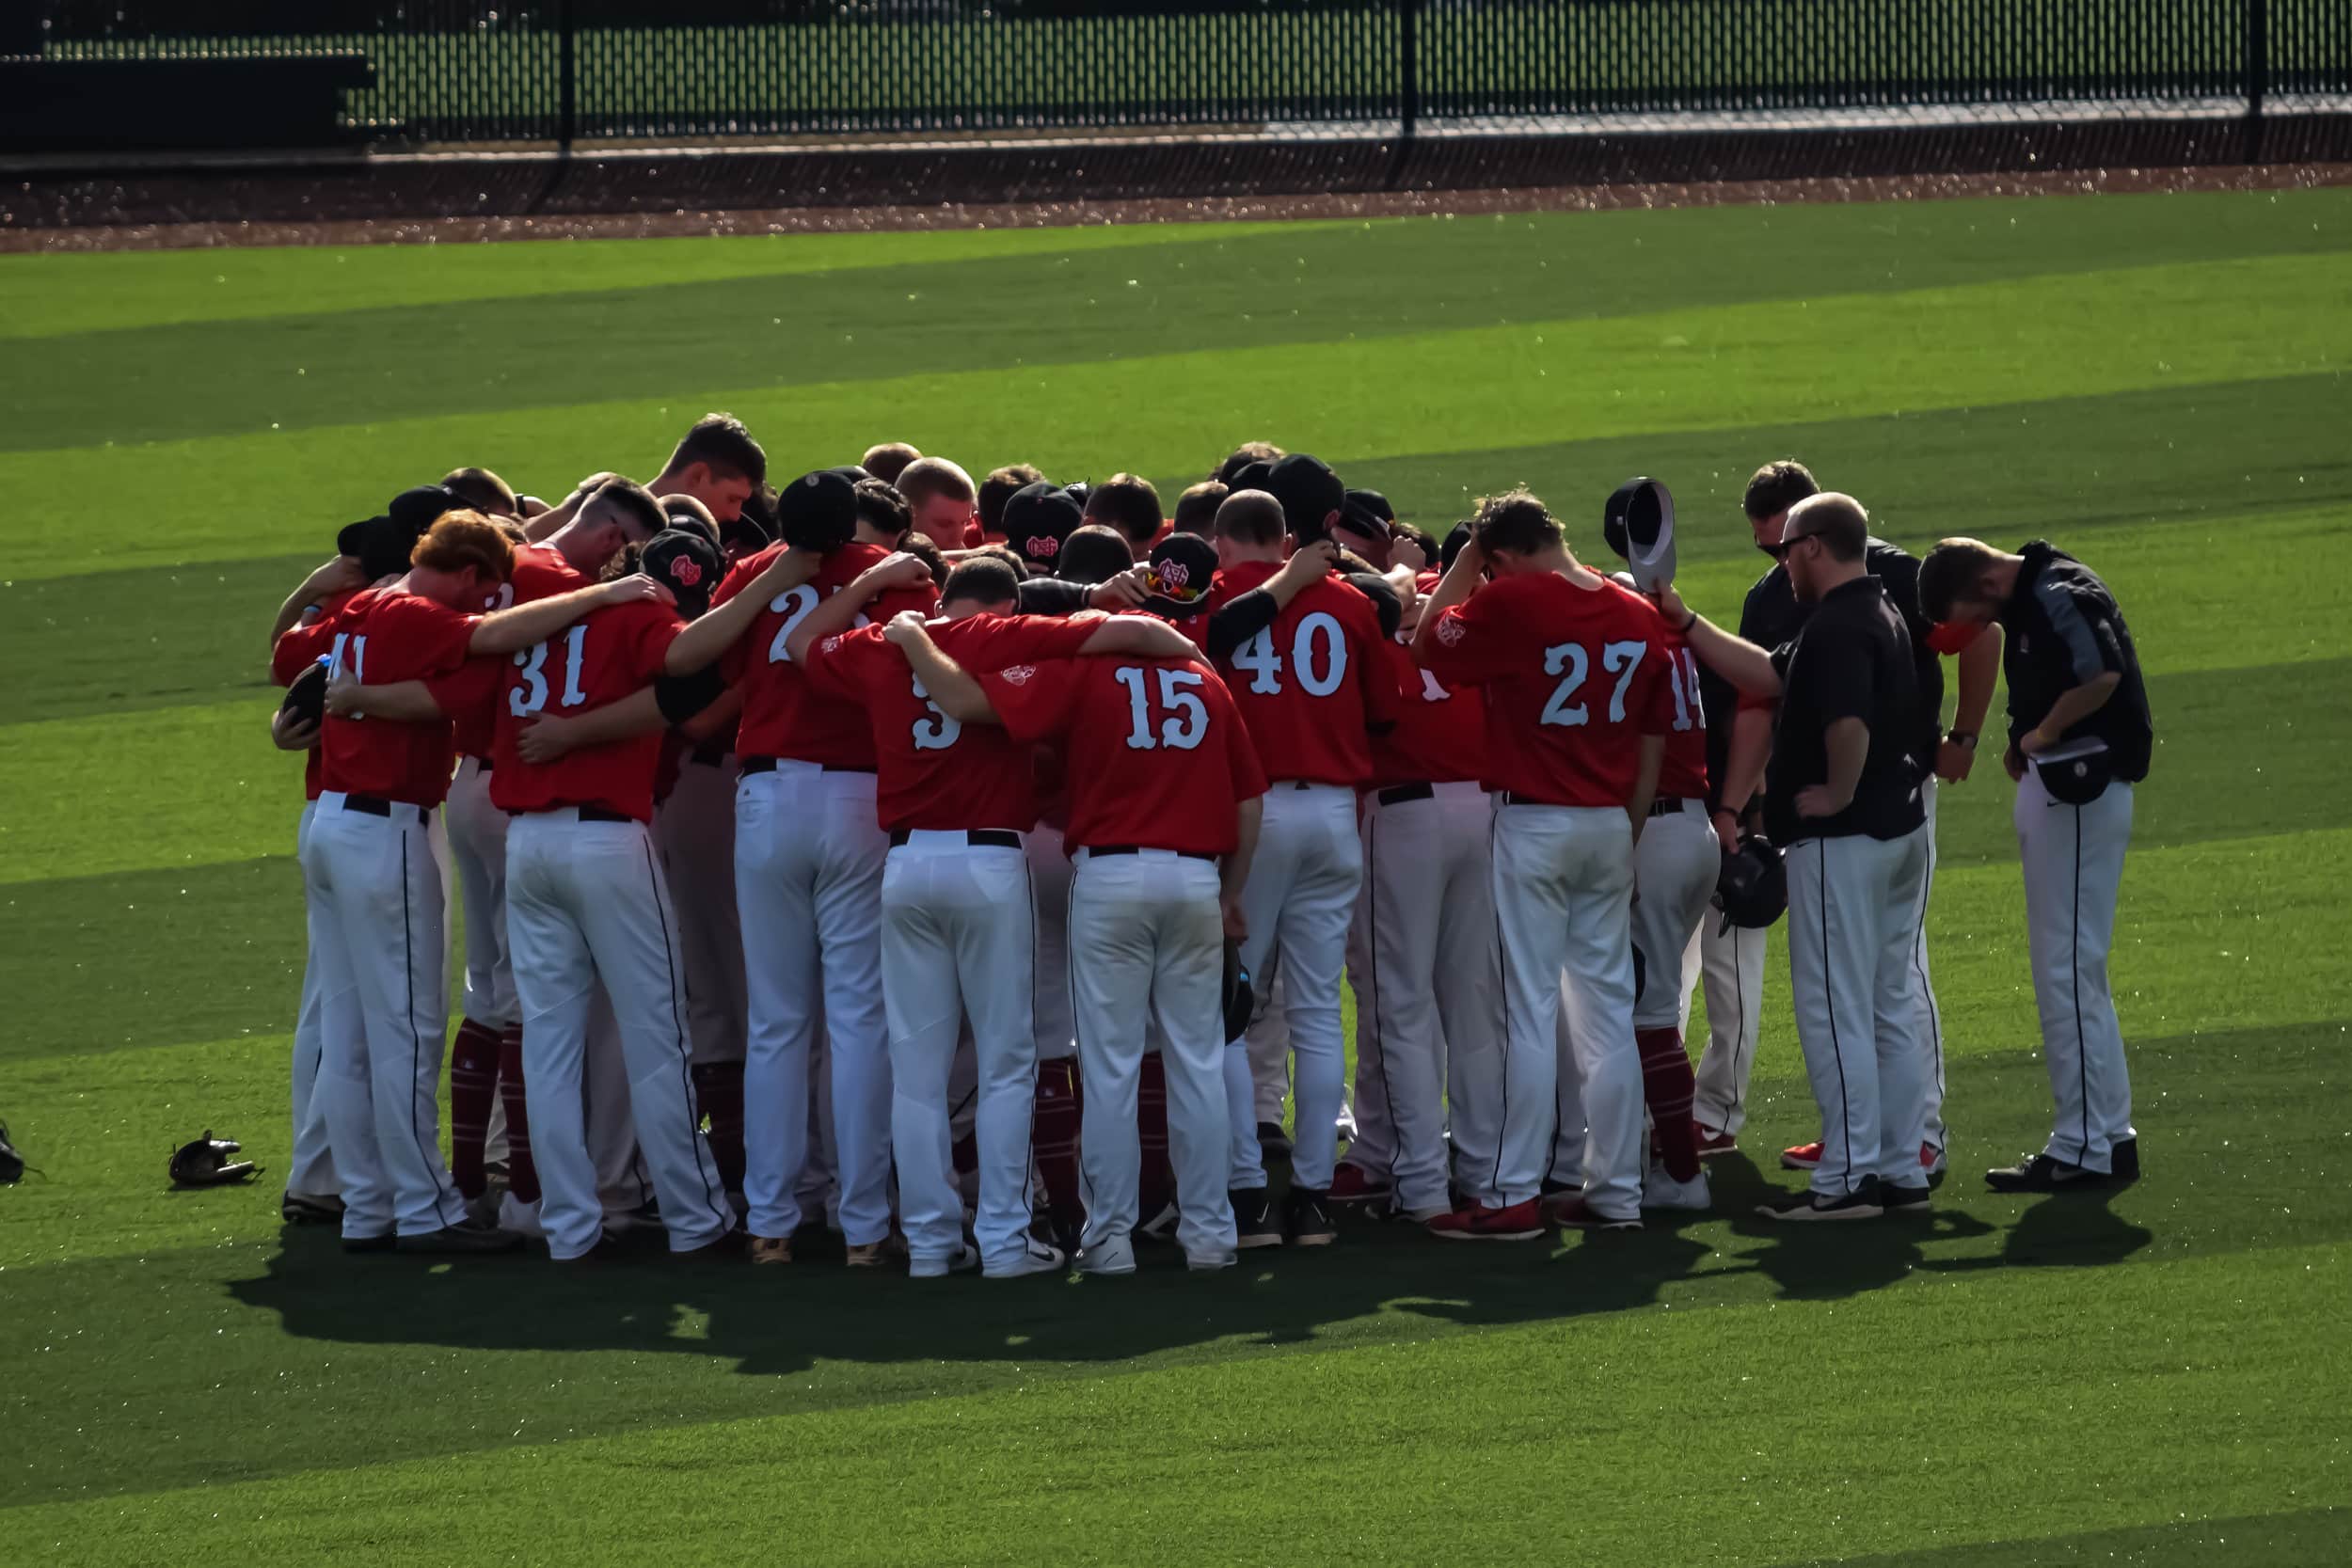 NGU prepares for the game the right way, by praying together as a family.